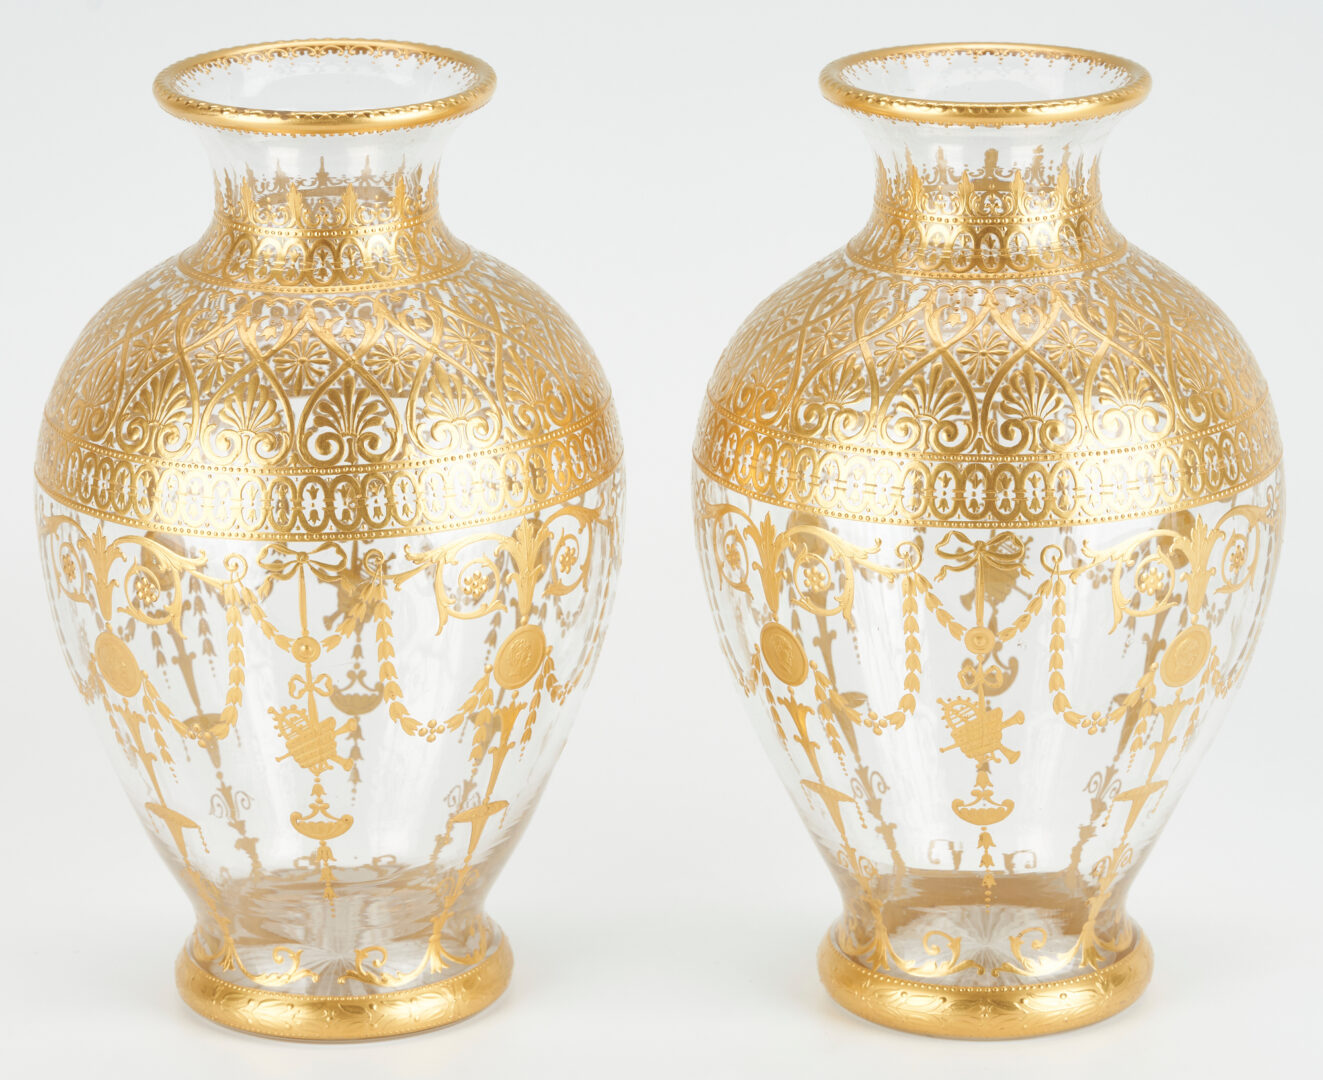 Lot 313: Pair of Baccarat Vases w/ Neoclassical Gilt Decoration